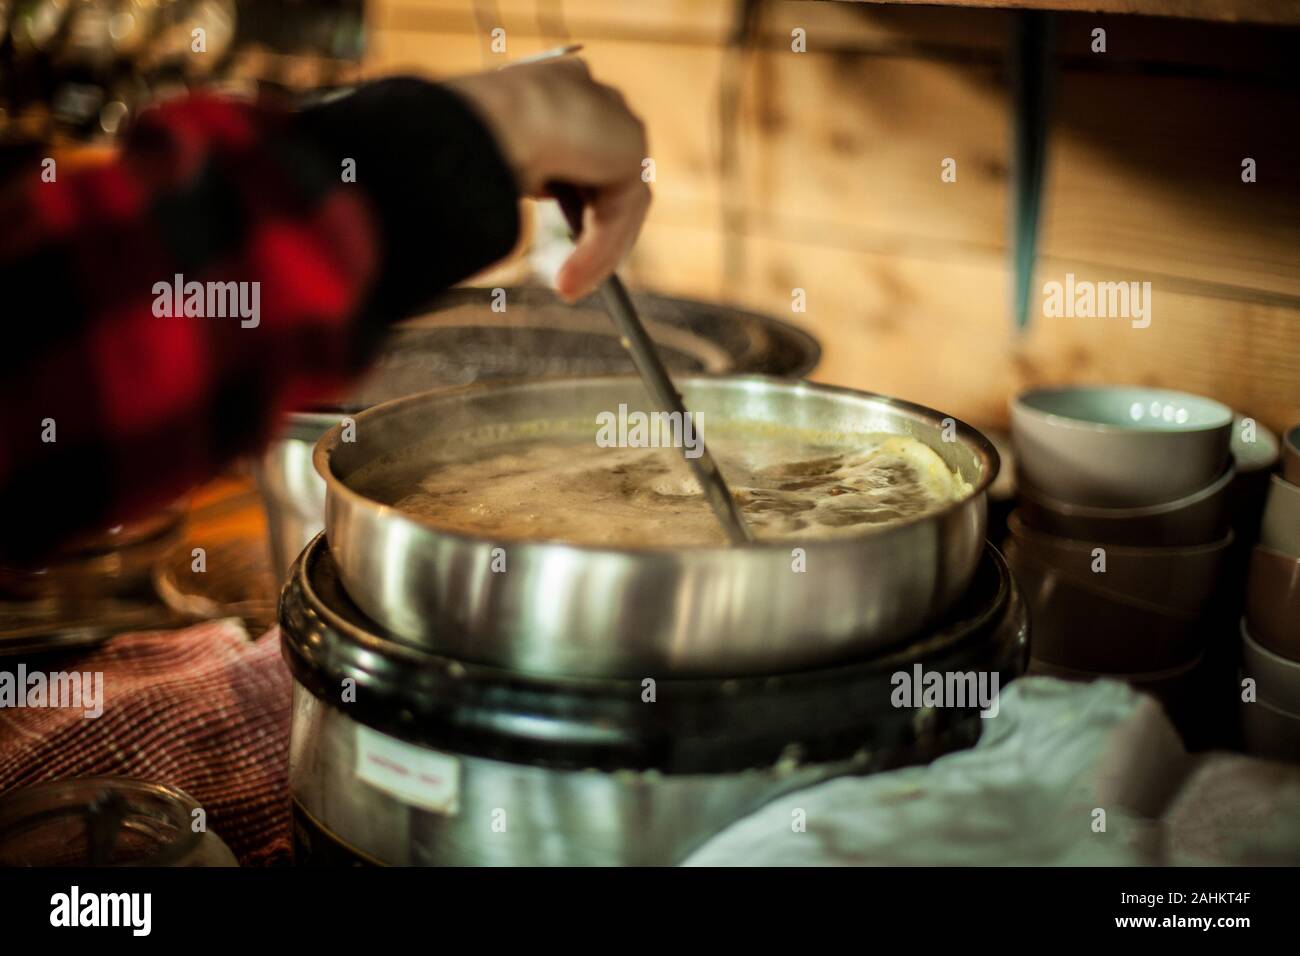 https://c8.alamy.com/comp/2AHKT4F/side-view-close-up-of-homemade-healthy-soup-in-big-metallic-pot-hand-is-stirring-the-meal-with-scoop-while-it-is-boiling-blurred-kitchen-and-dishes-in-the-background-2AHKT4F.jpg